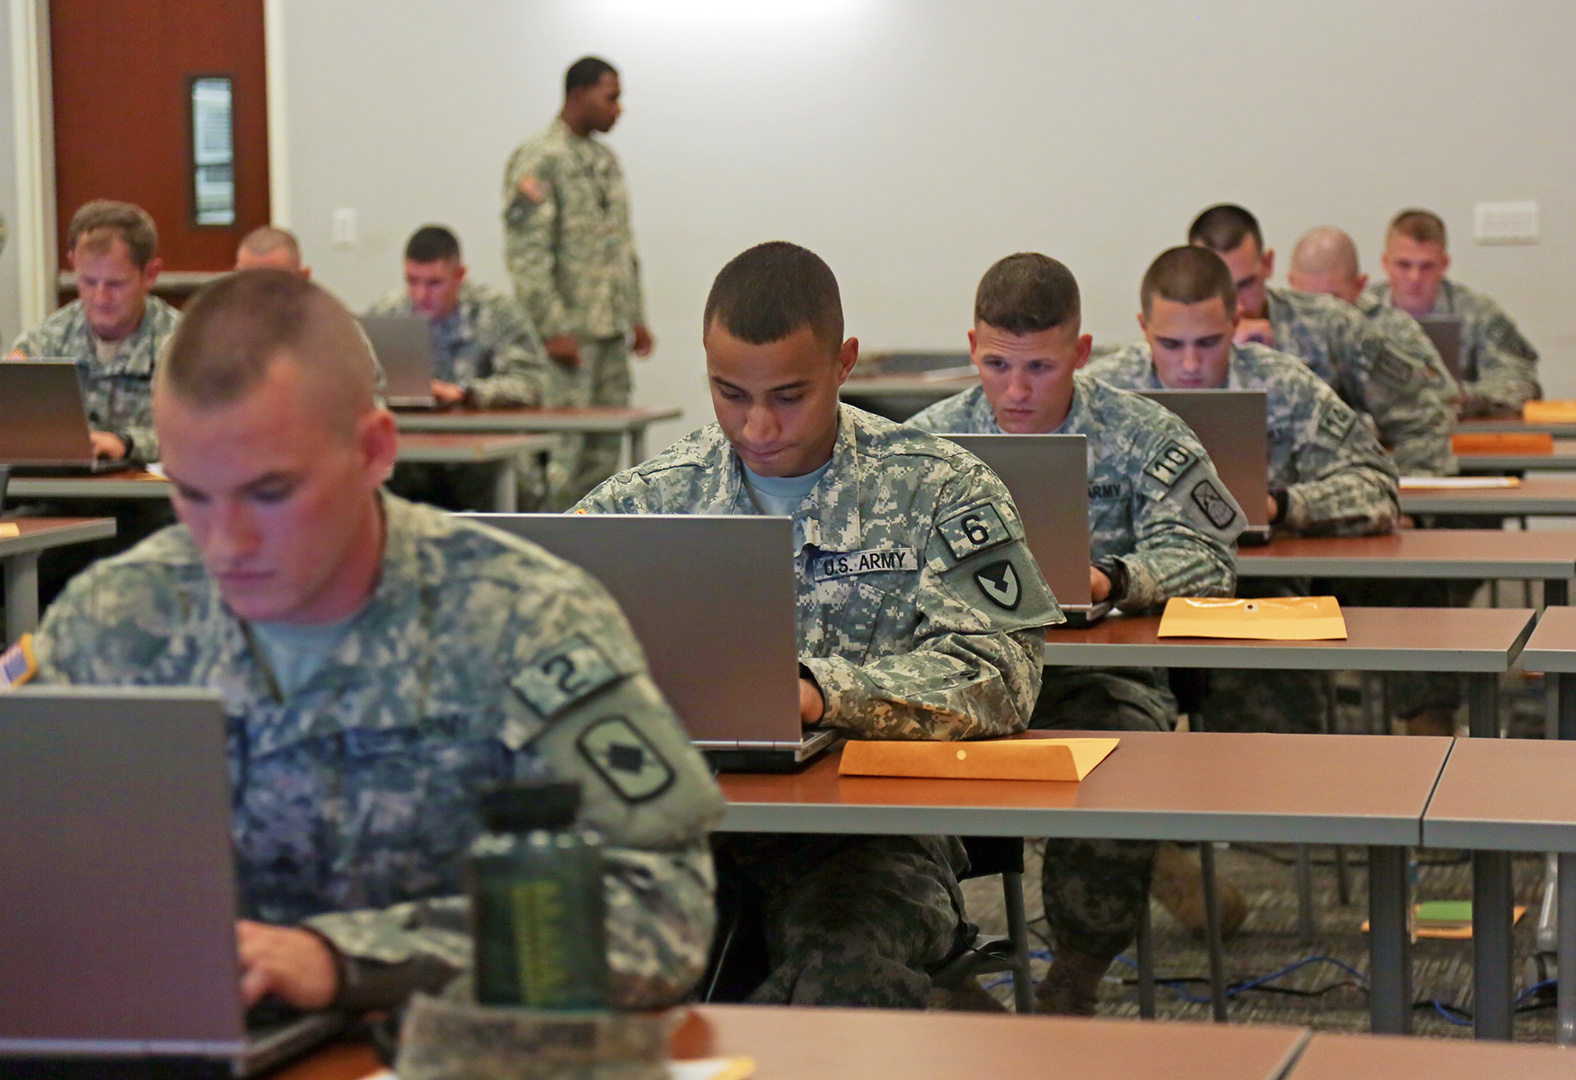 An NCO on the organizing staff observes competitors as they compose their essays during the first day of the 2014 Best Warrior Competition on Monday at Fort Lee. (Photo by Spc. Jordan Talbot)